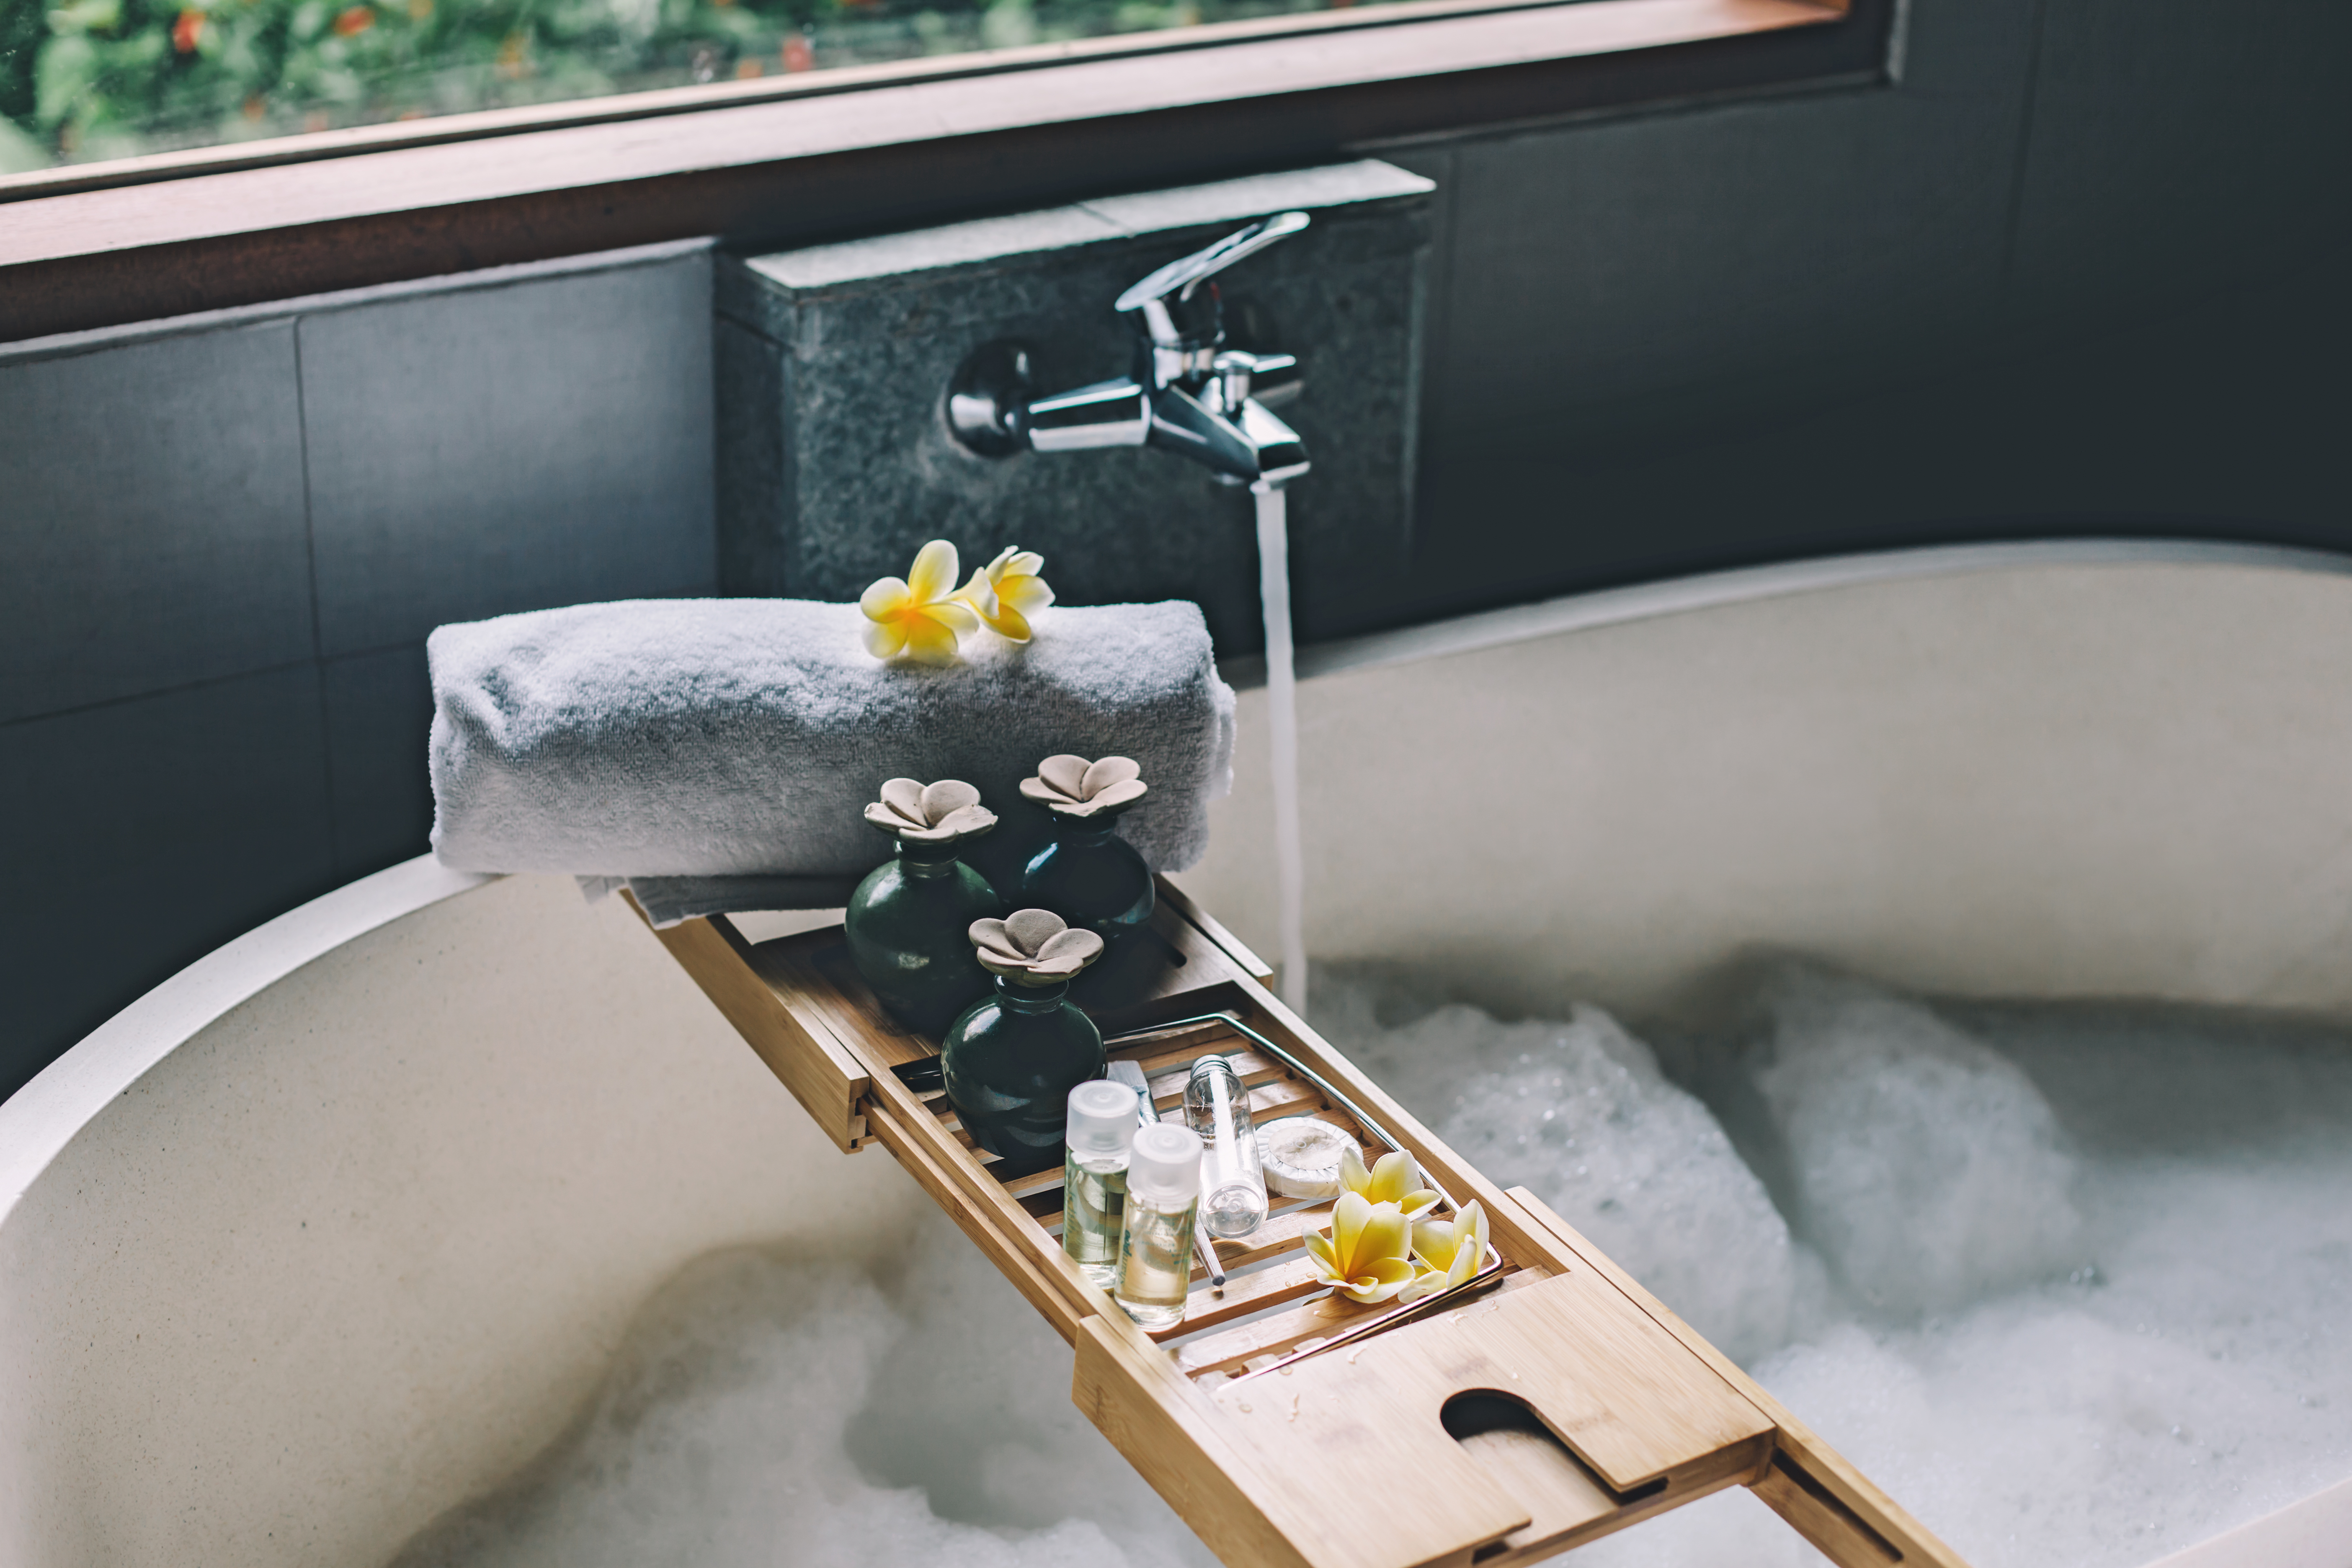 Luxurious bathtub. | Source: Getty Images